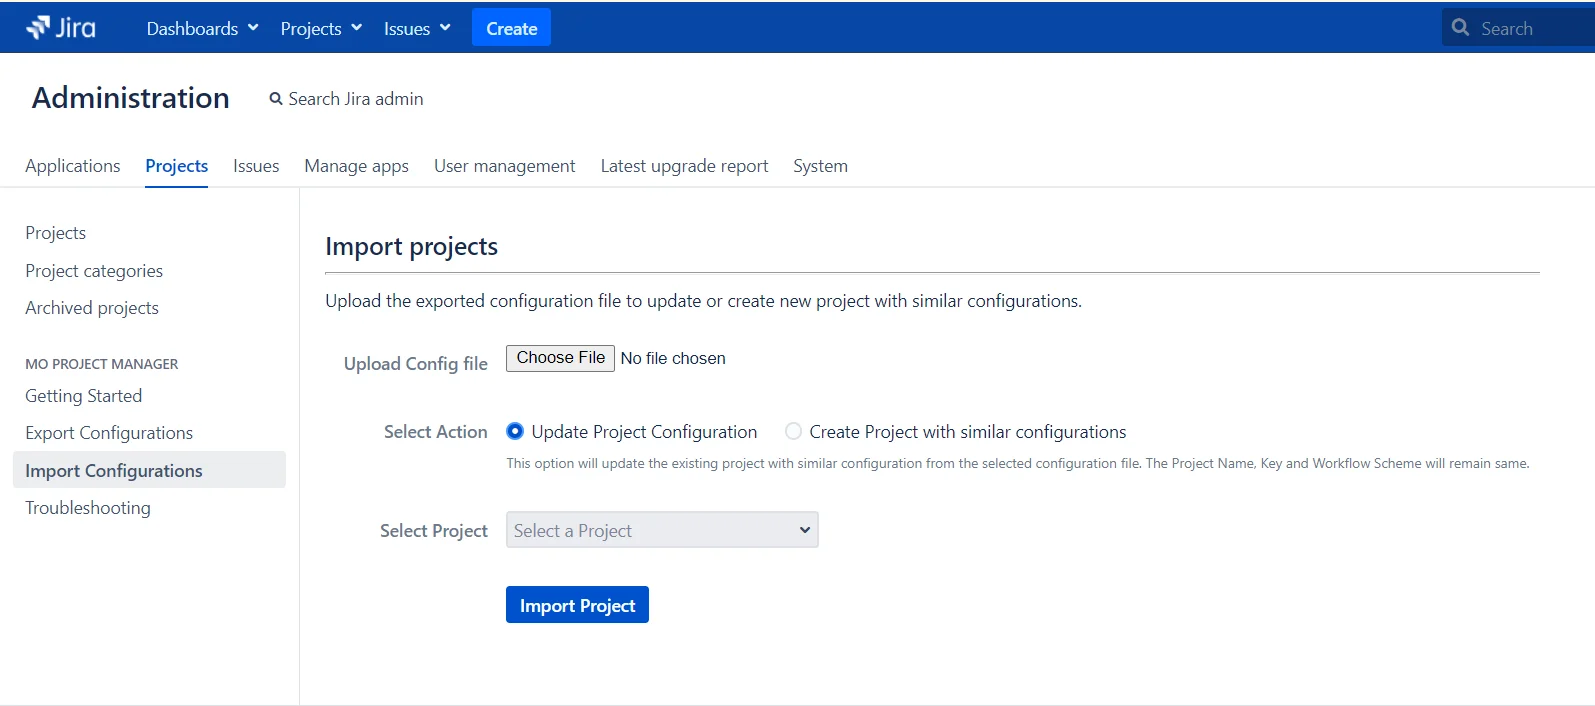 Update Existing Project's Configurations